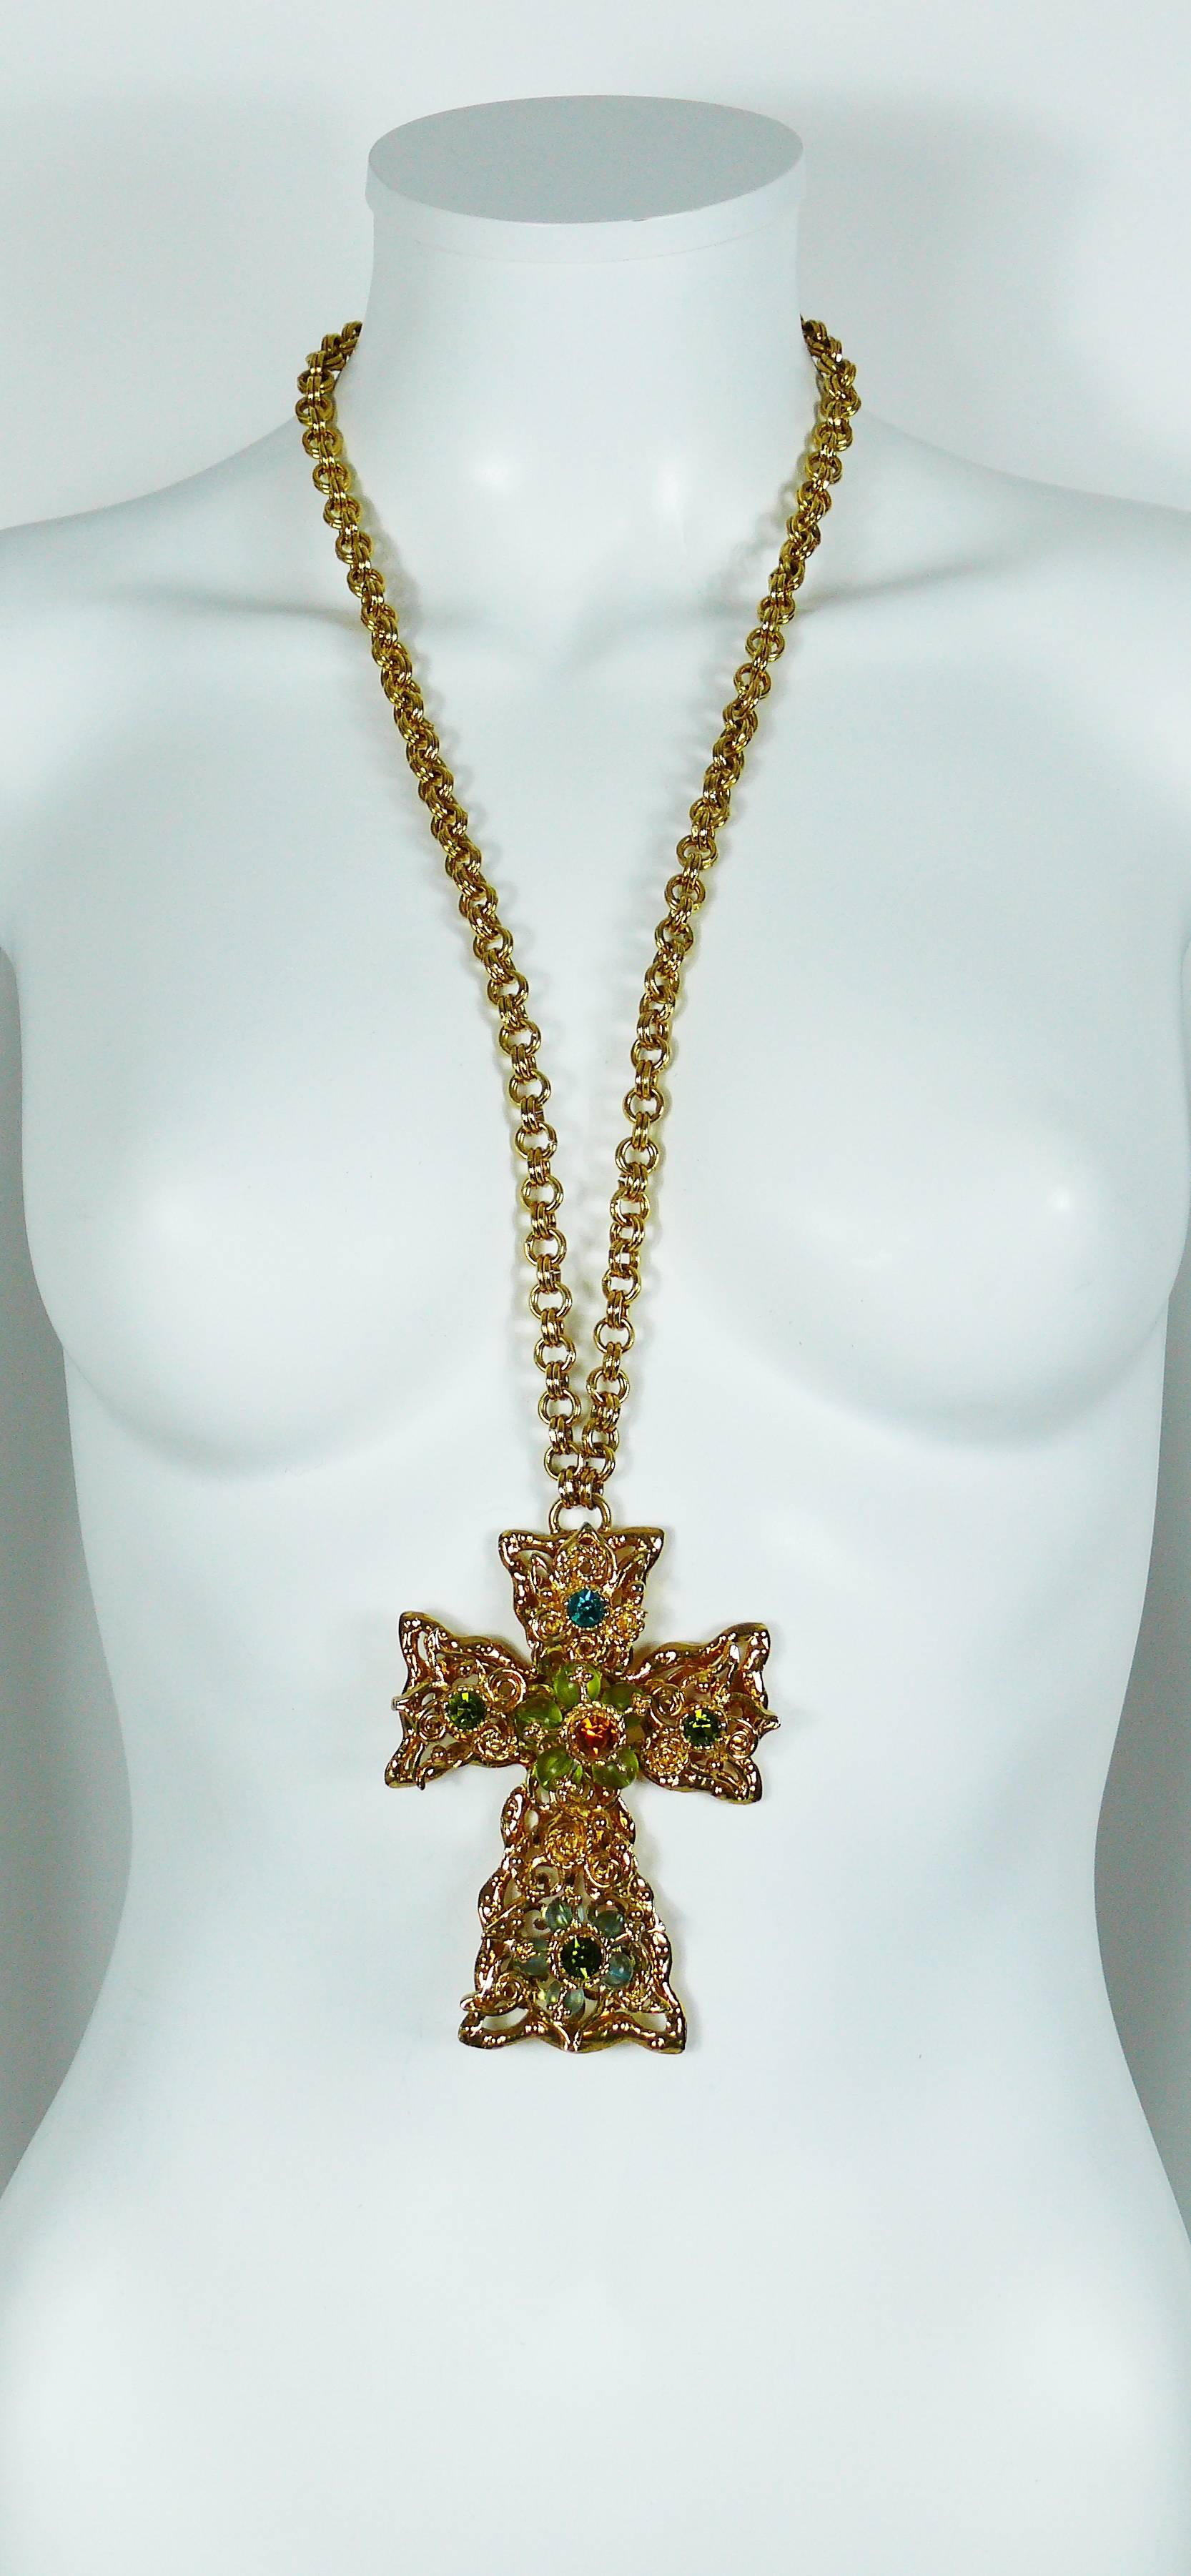 CHRISTIAN LACROIX vintage rare massive openwork gold tone cross pendant necklace with multi colored crystal embellishement.

Chunky gold tone chain.
Hook clasp.

Marked CHRISTIAN LACROIX CL Made in France.

Indicative measurements : total length